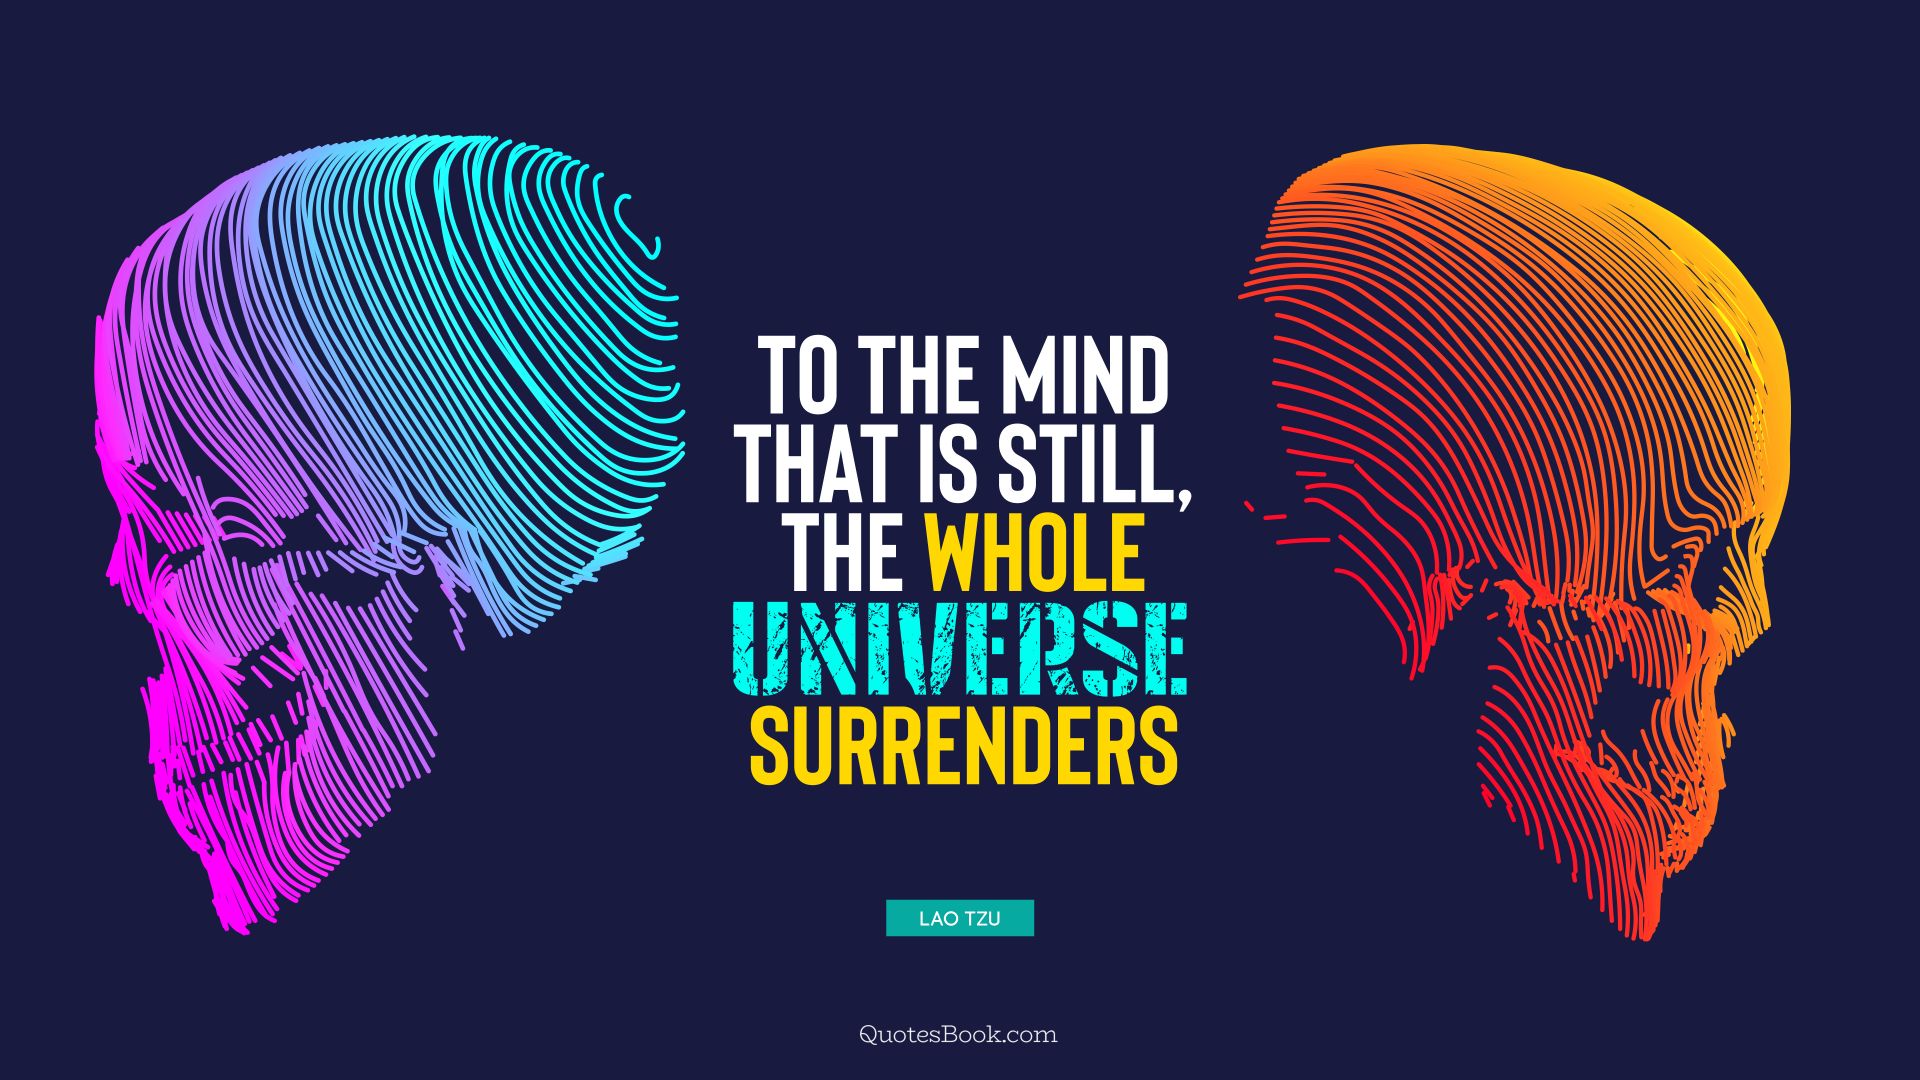 To the mind that is still, the whole universe surrenders. - Quote by Lao Tzu